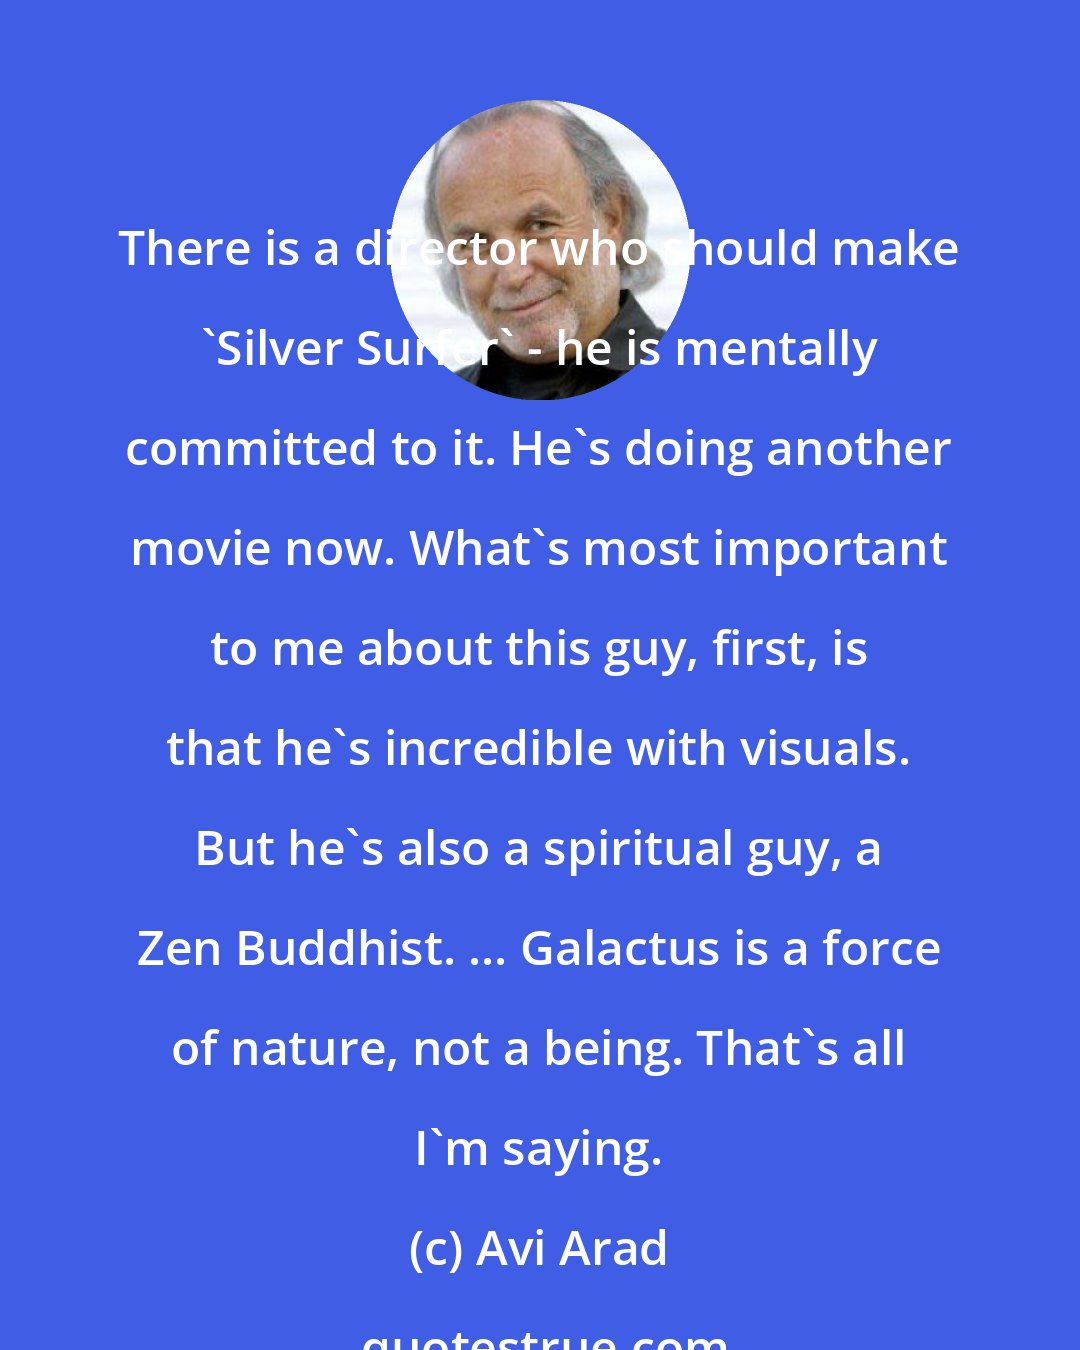 Avi Arad: There is a director who should make 'Silver Surfer' - he is mentally committed to it. He's doing another movie now. What's most important to me about this guy, first, is that he's incredible with visuals. But he's also a spiritual guy, a Zen Buddhist. ... Galactus is a force of nature, not a being. That's all I'm saying.